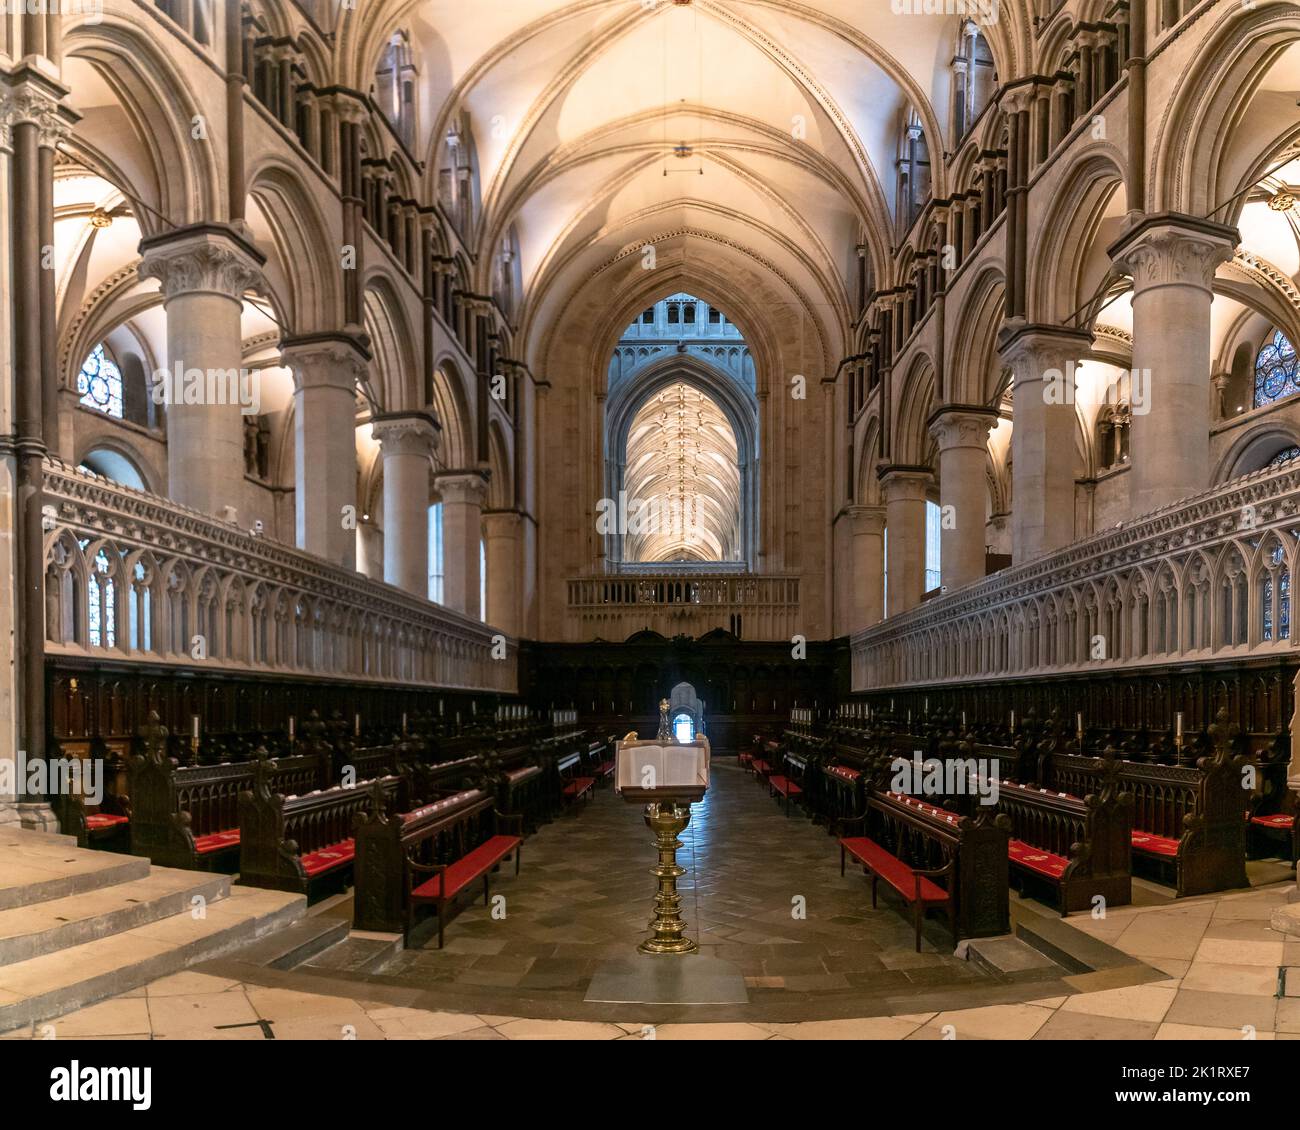 Canterbury, United Kingdom - 10 September, 2022: view of the Quire inside the historic Canterbury Cathedral Stock Photo